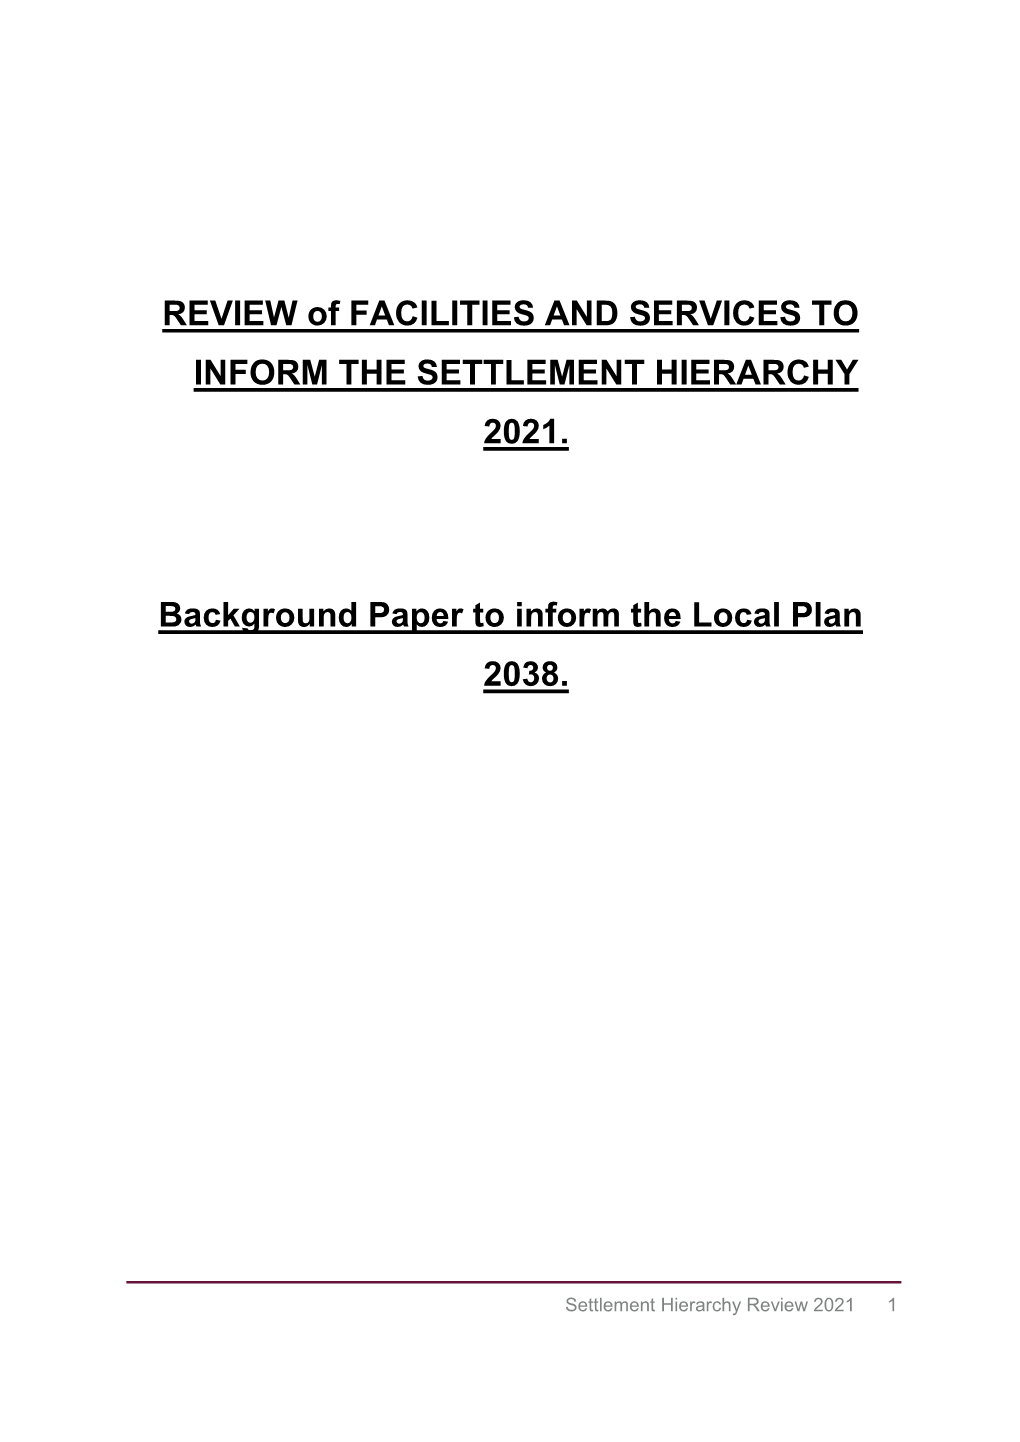 Settlement Hierarchy Review 2021 1